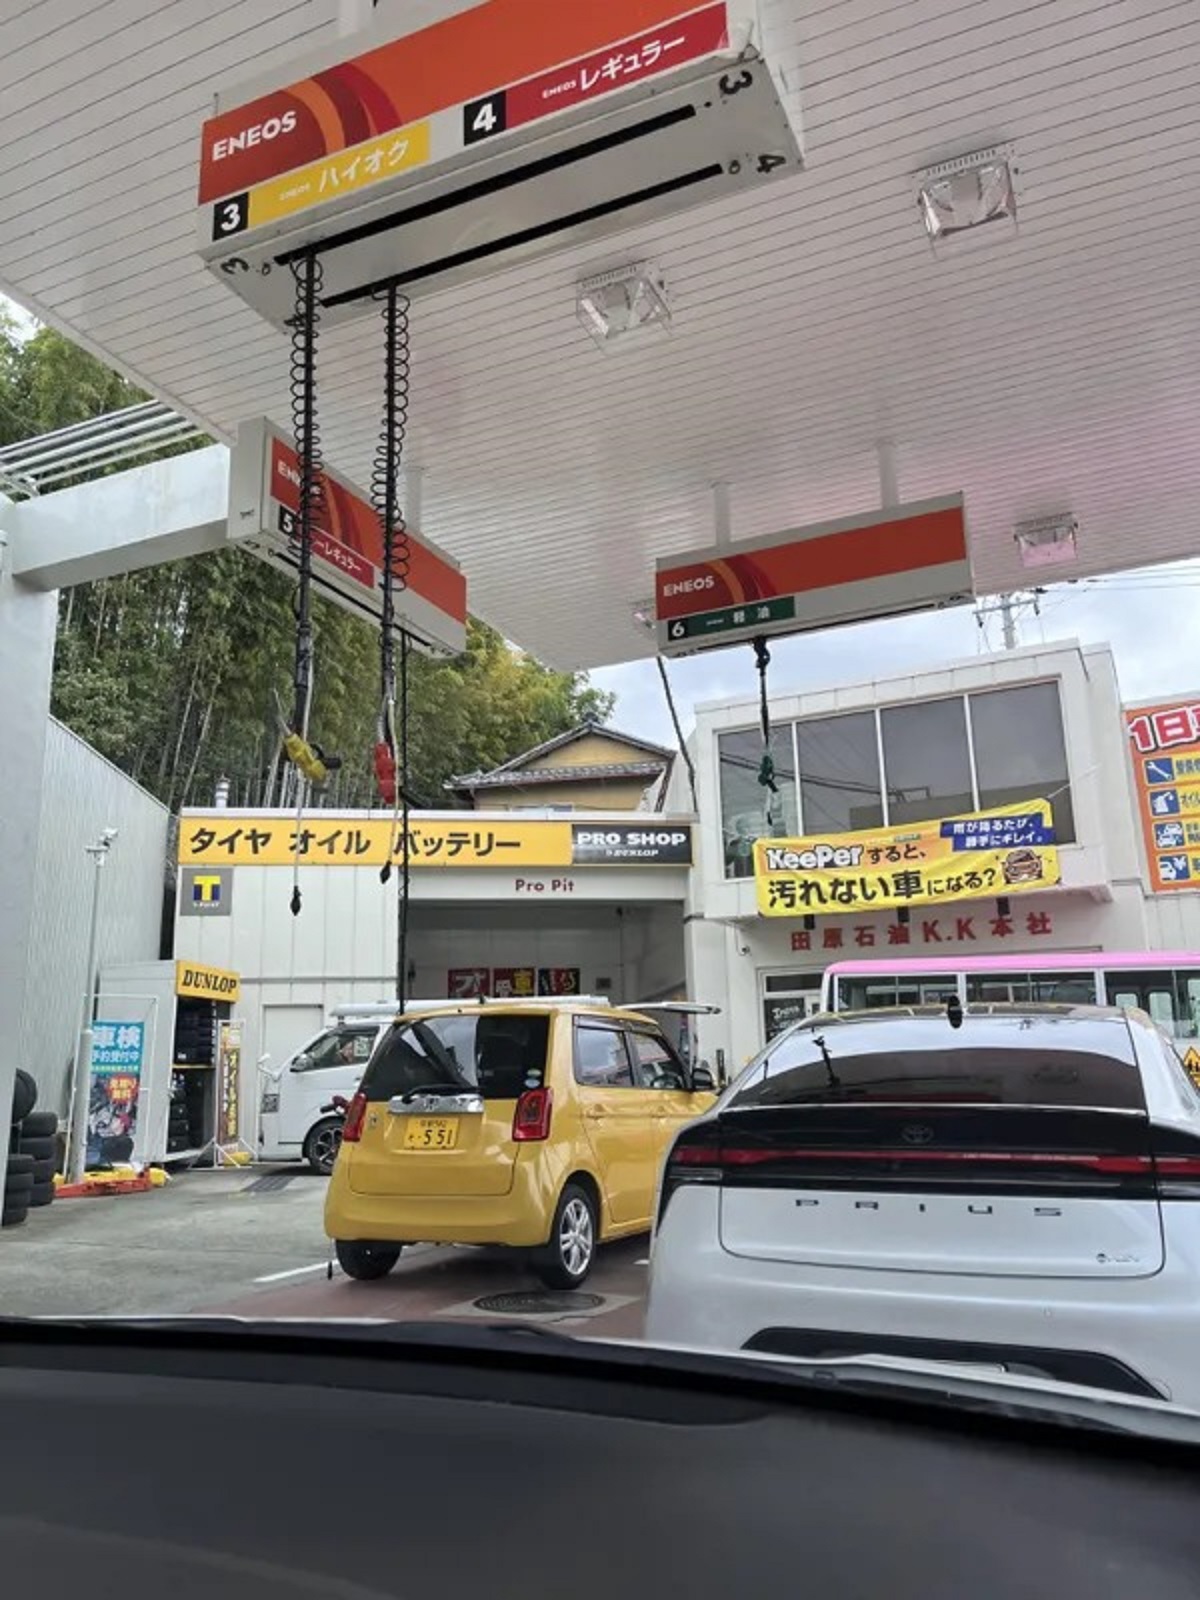 In Japan, the fuel comes from above.